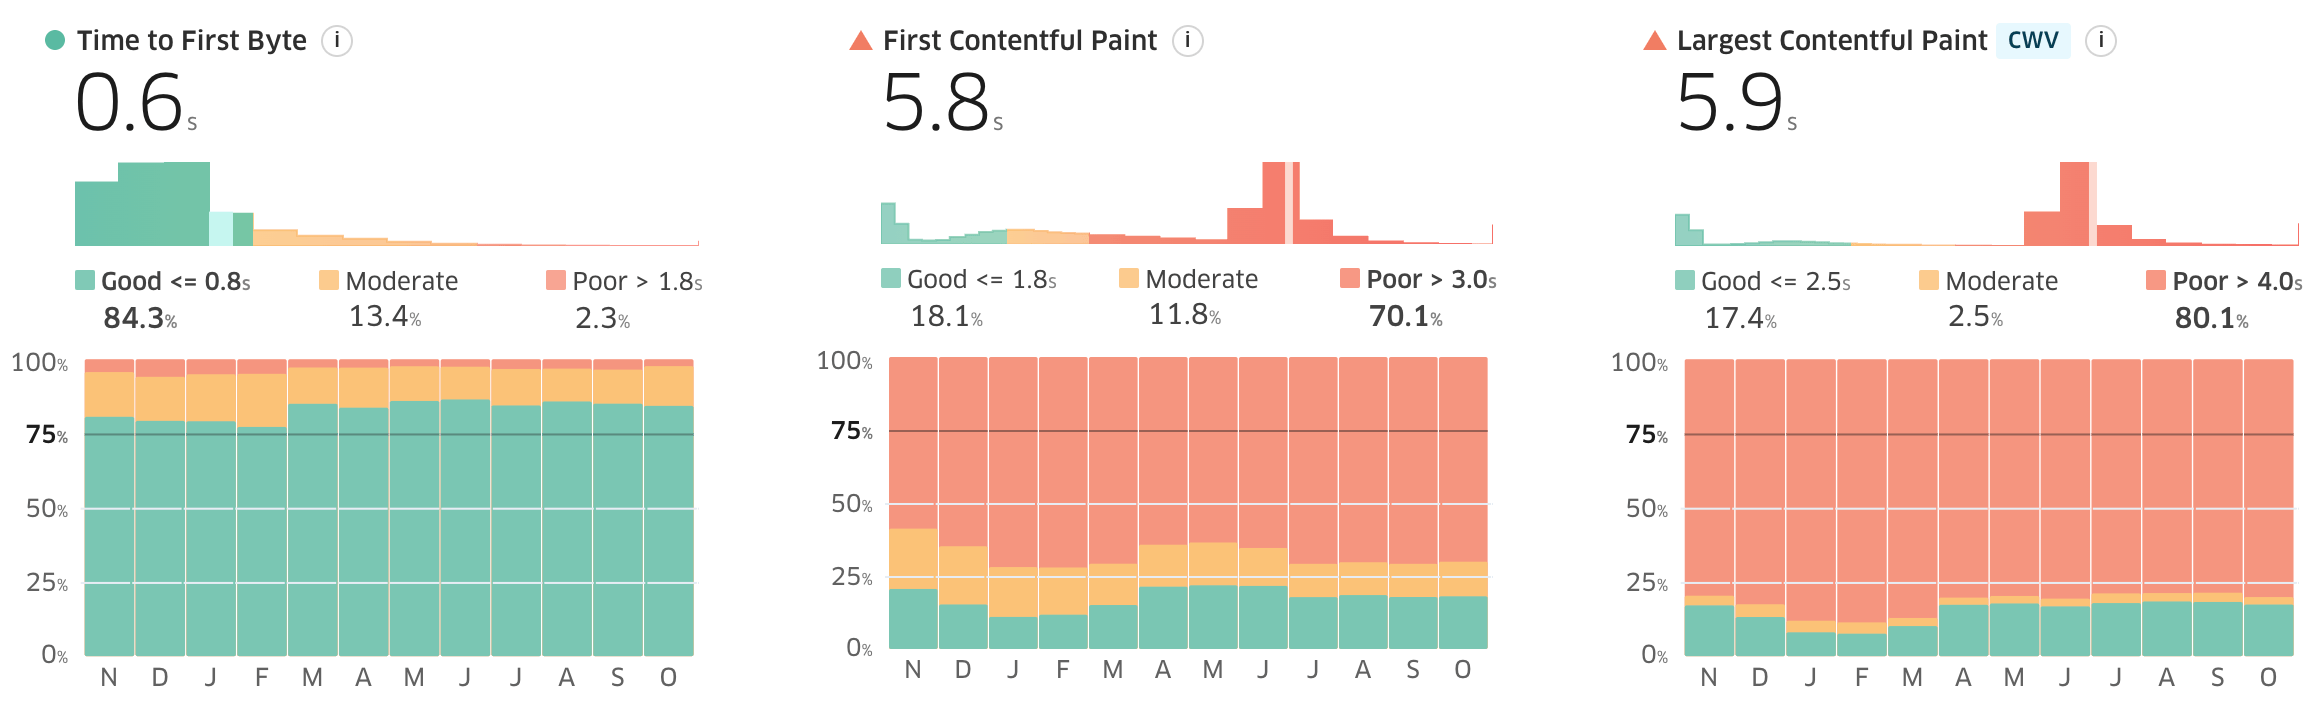 Screenshot from treo.sh/sitespeed that shows First Contentful Paint being almost equal to Largest Contenful Paint.